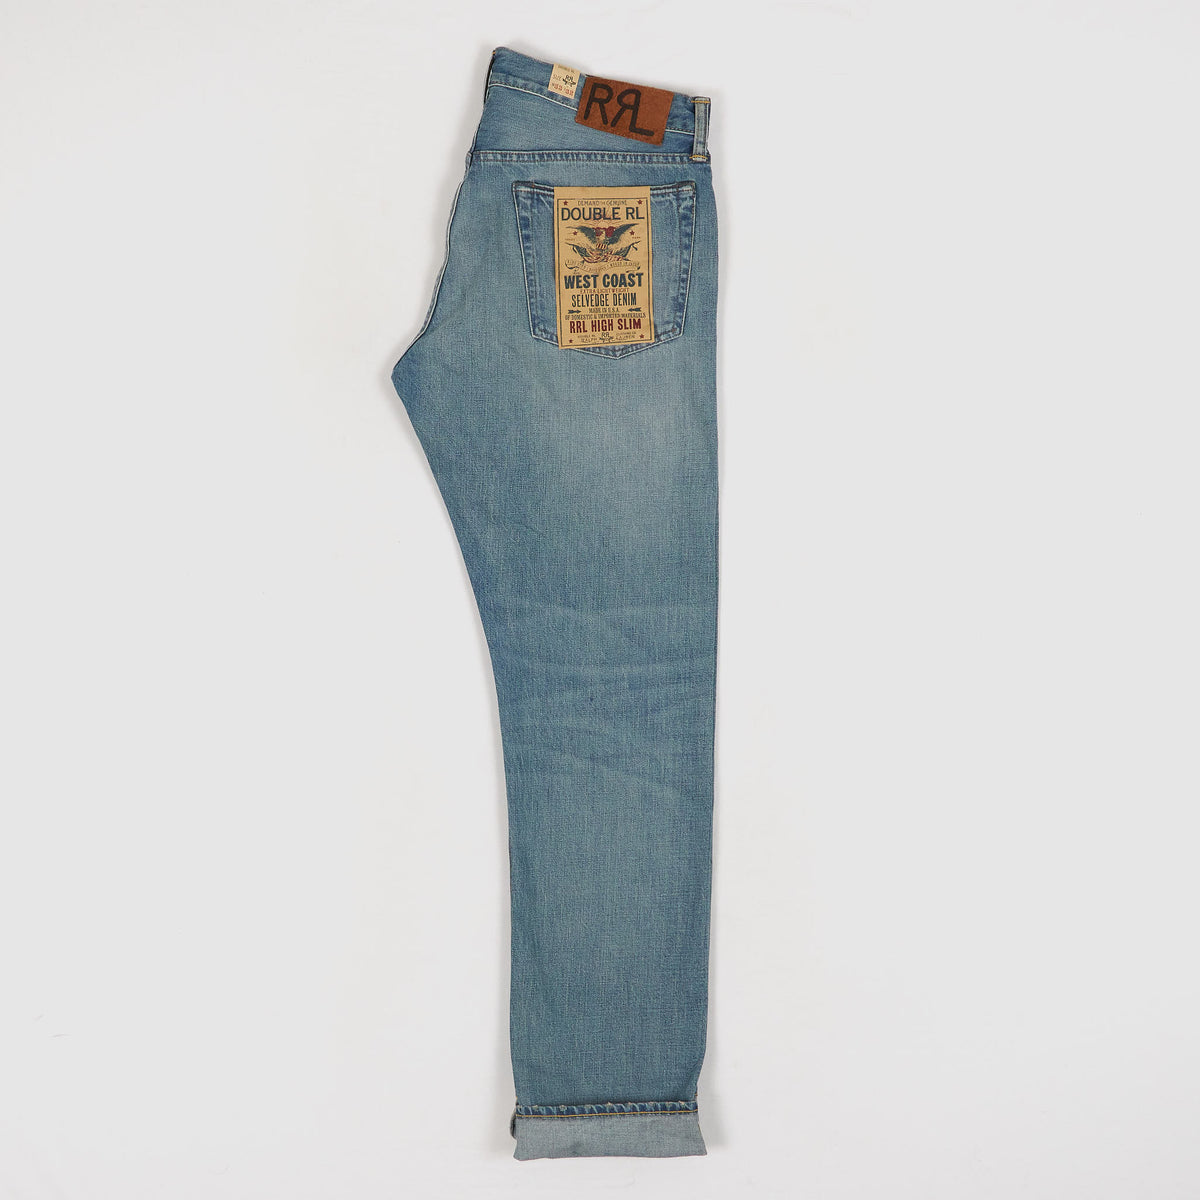 Double RL High Slim East West Jeans